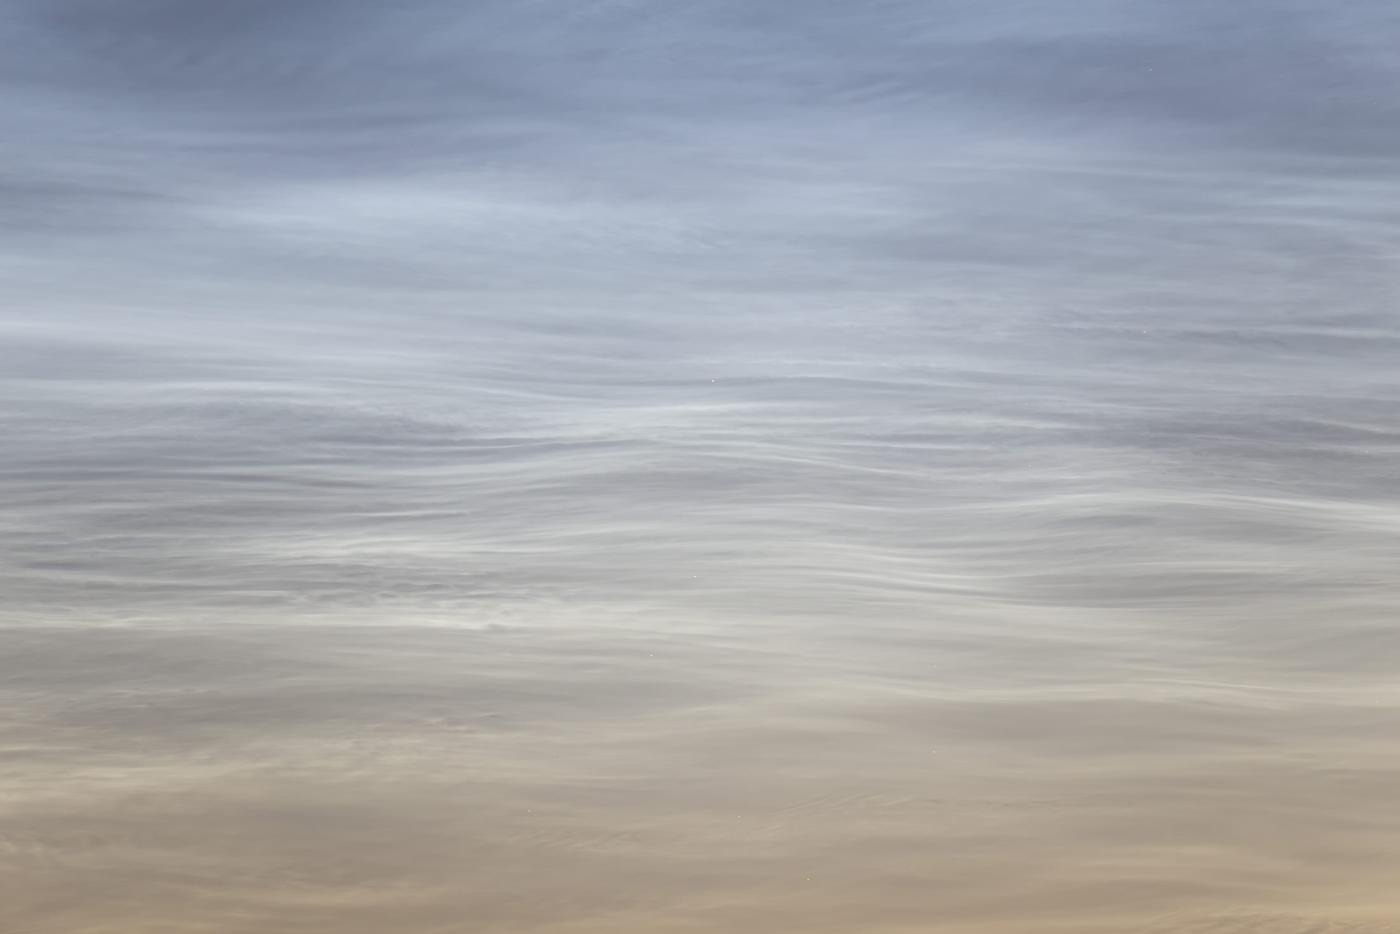 An image showing 'Silent Waves of the Sky: Noctilucent Clouds by Mikko Silvola'